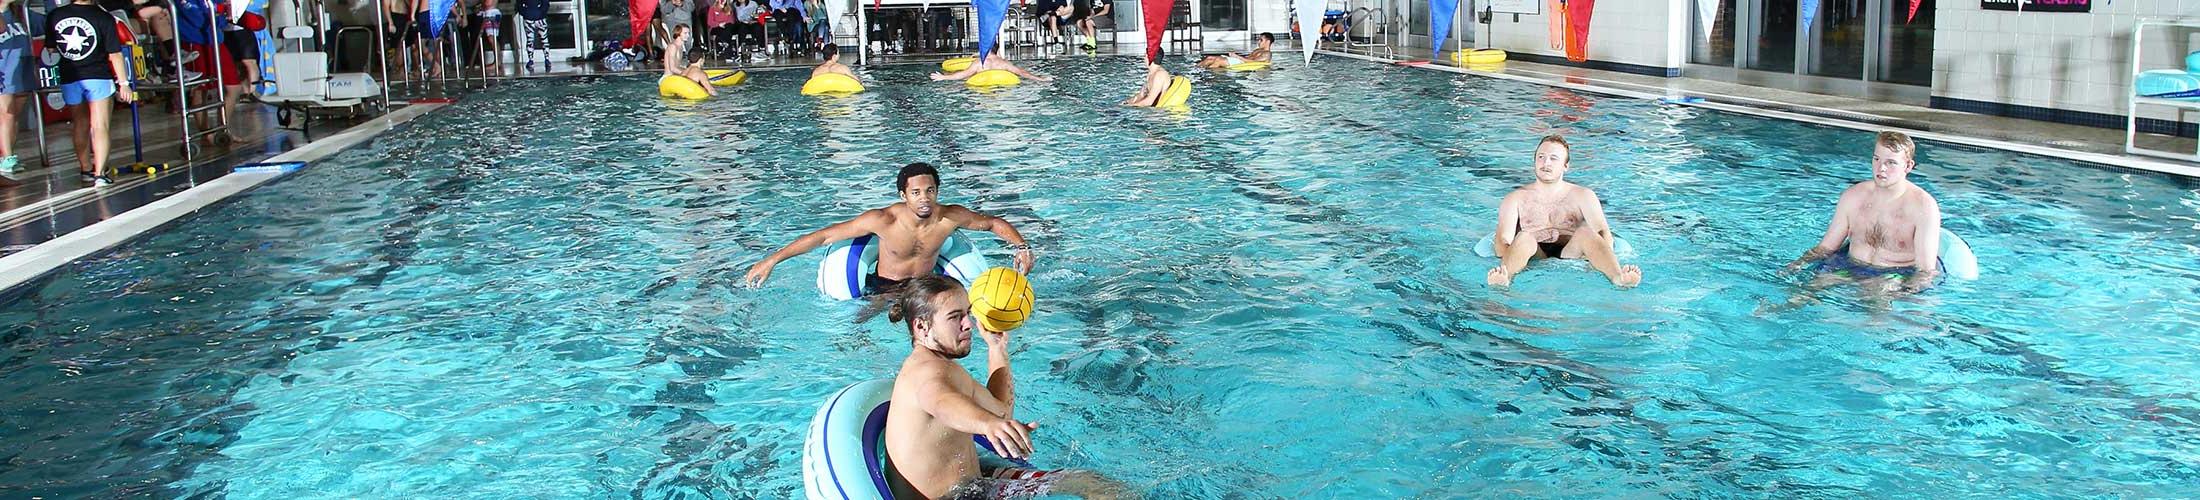 Students Playing Water Polo